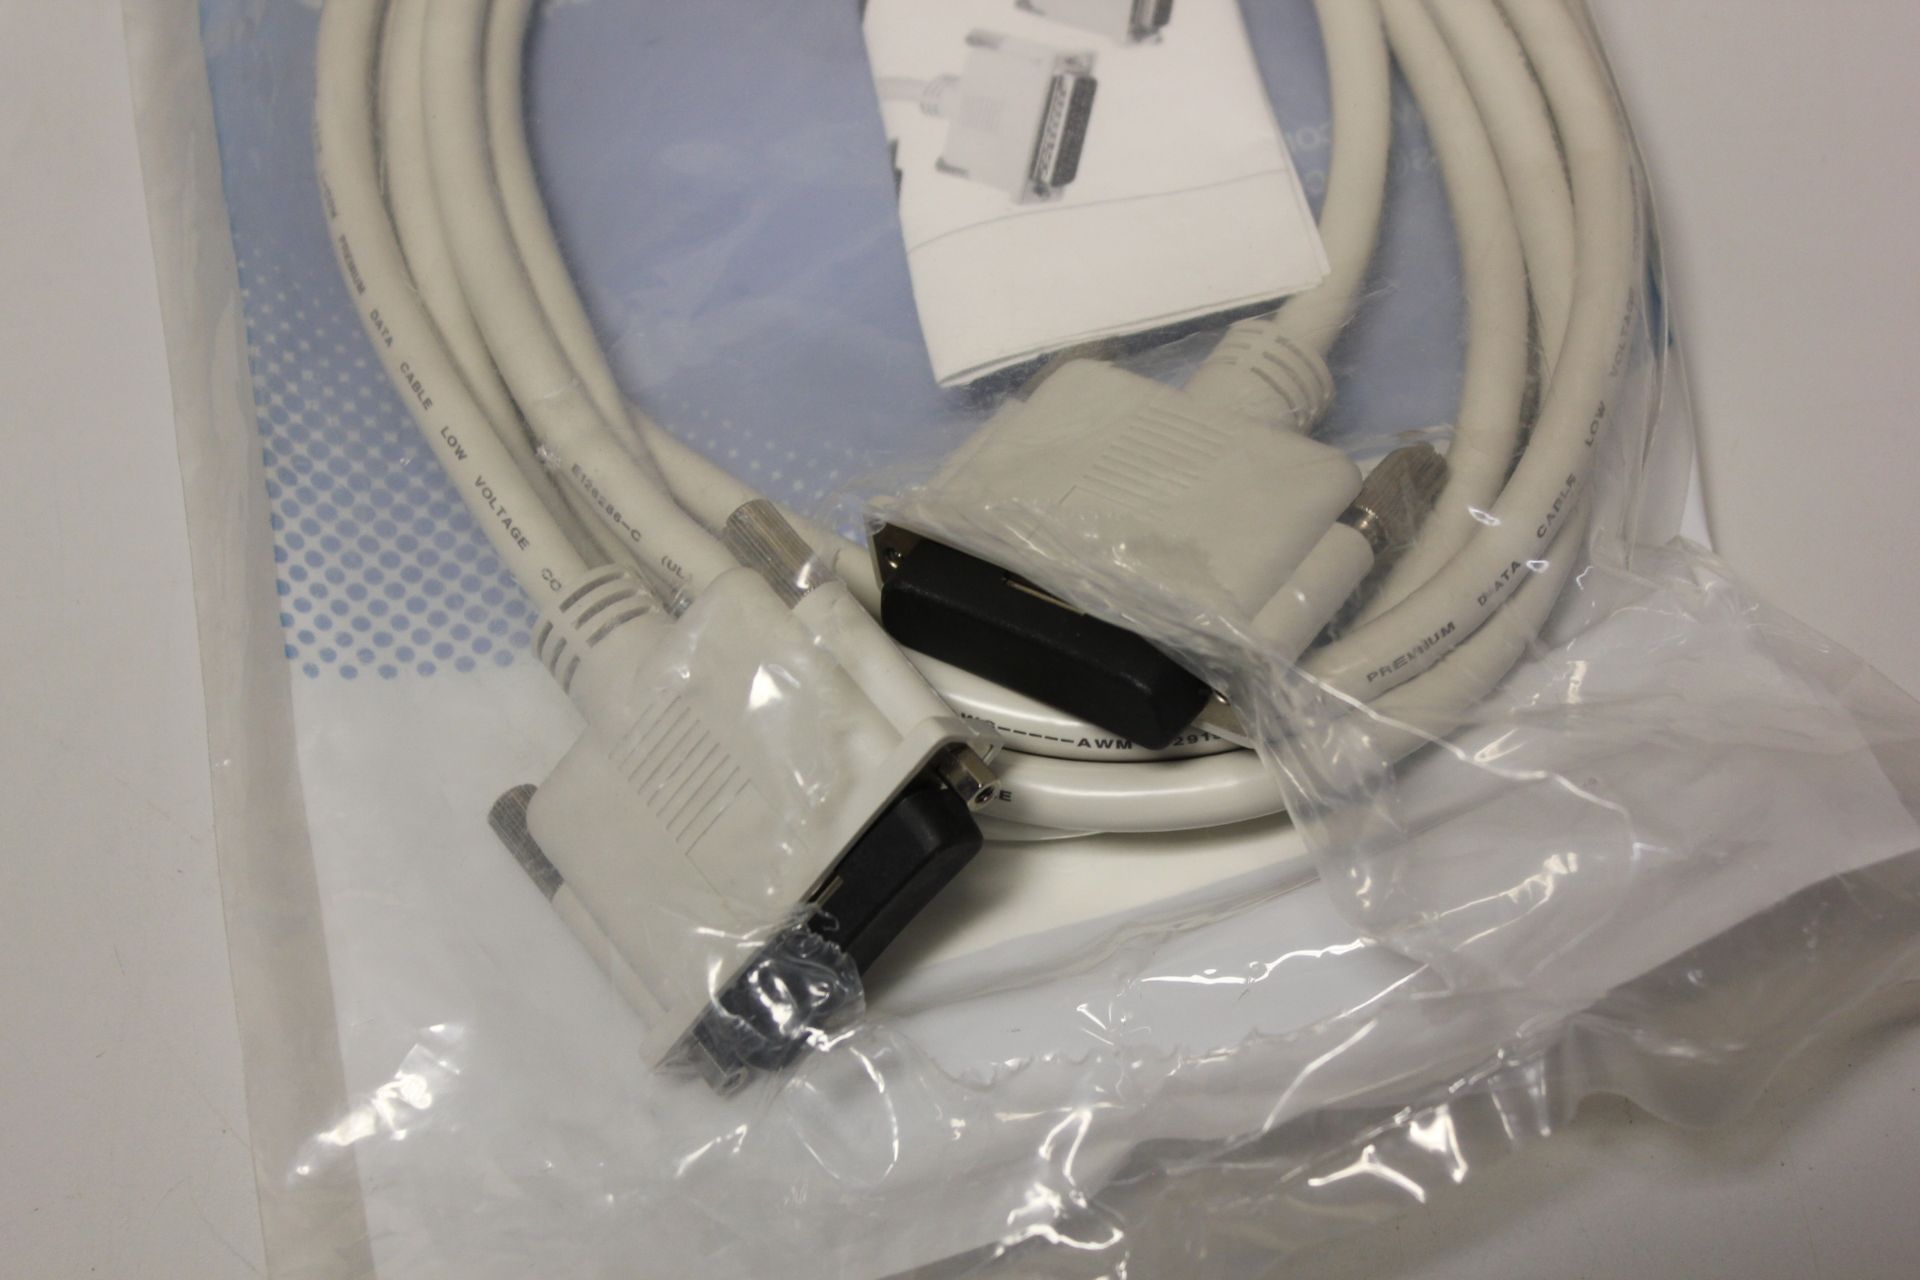 LOT OF NEW CABLES USB, KVM, PS2 - Image 11 of 11